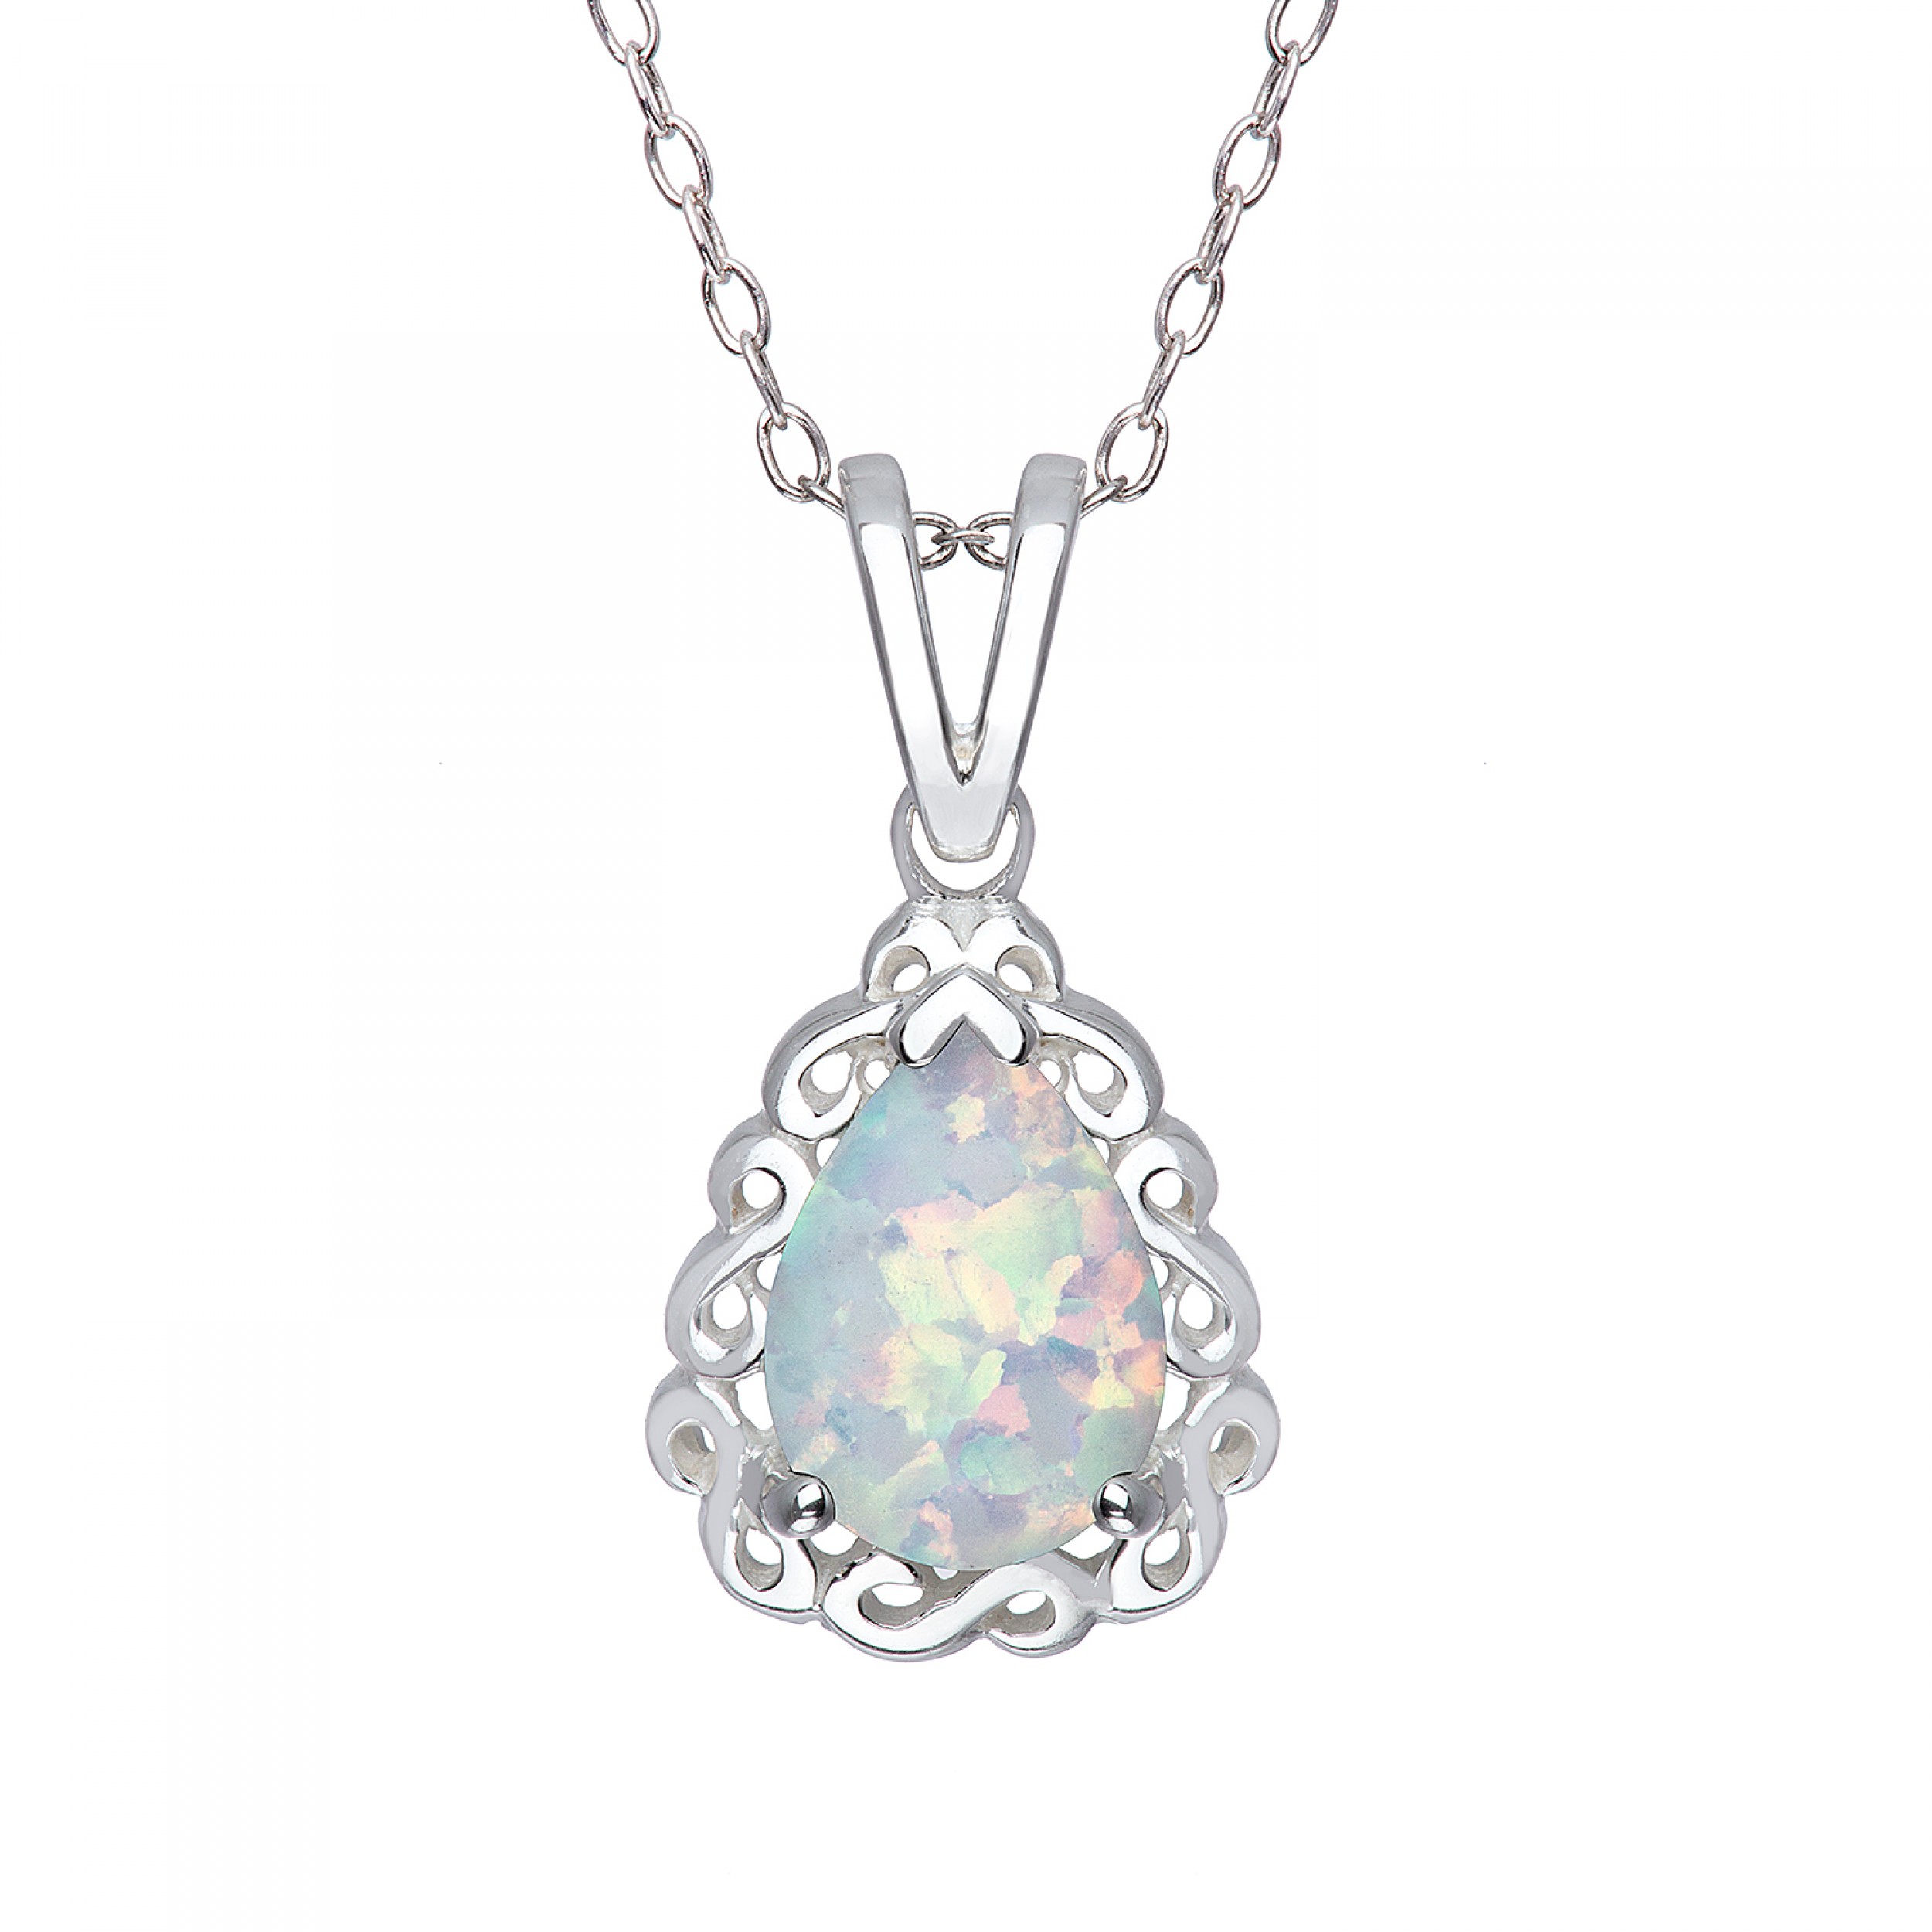 opal necklace 10 x 7mm created opal pendant in sterling silver LUJPCVB